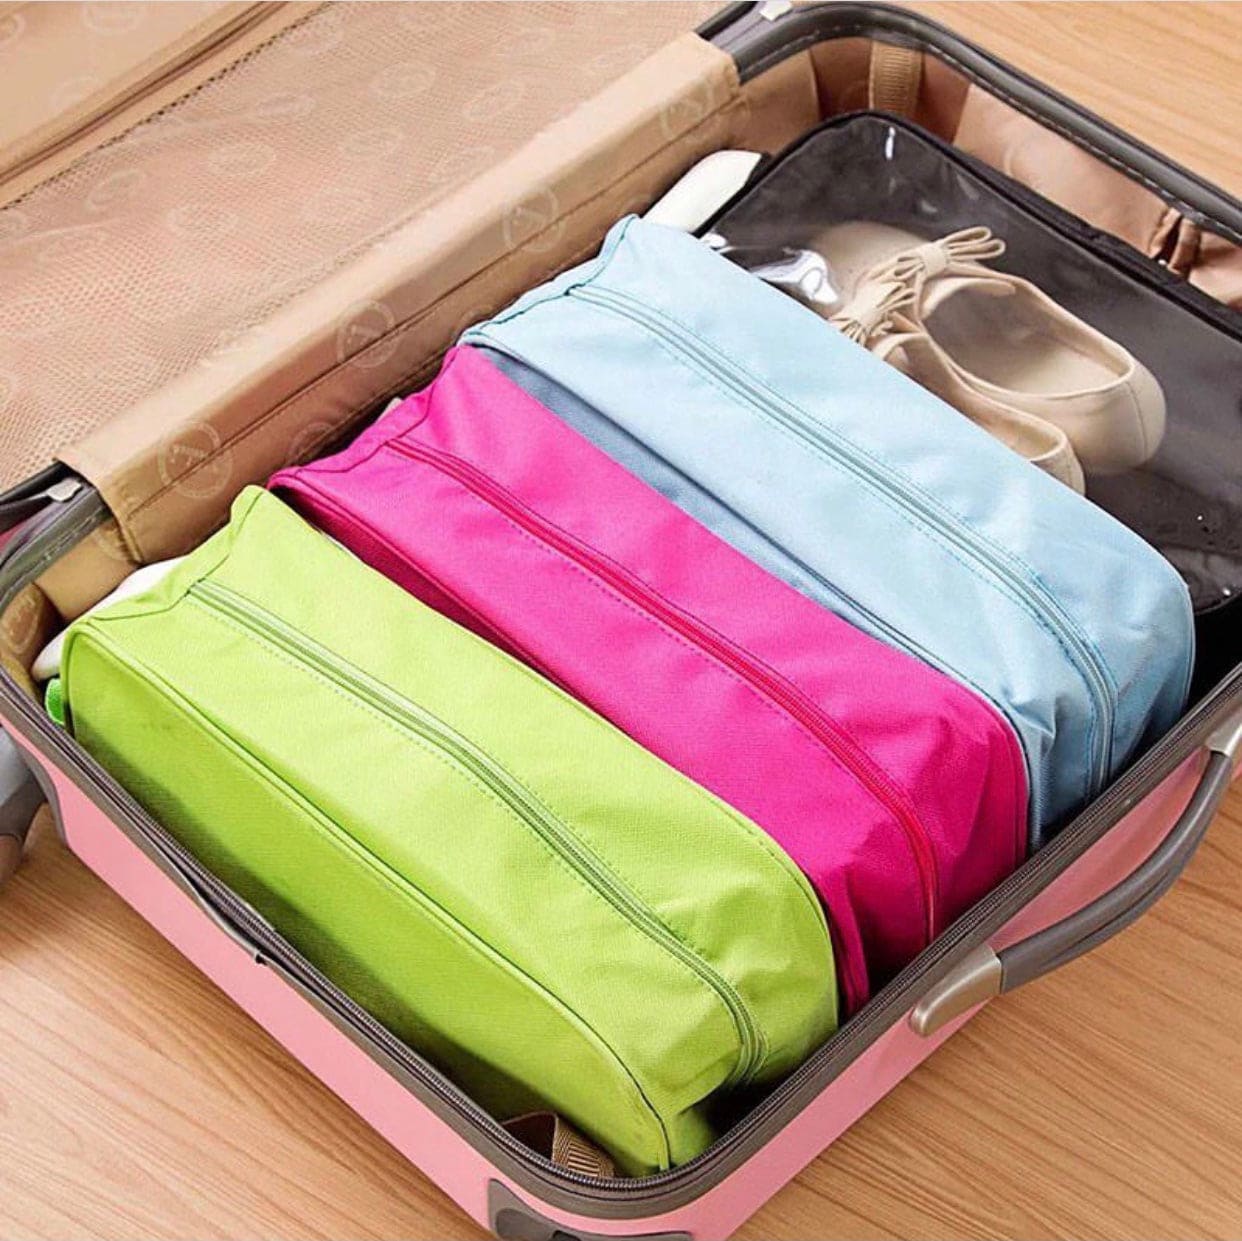 Large Capacity Colorful Travel Transparent Shoe Bag, Suit case Luggage Organizers, Durable Travel Essential Toiletry Waterproof Shoe Organizers, Travel Portable Sorting Pouch